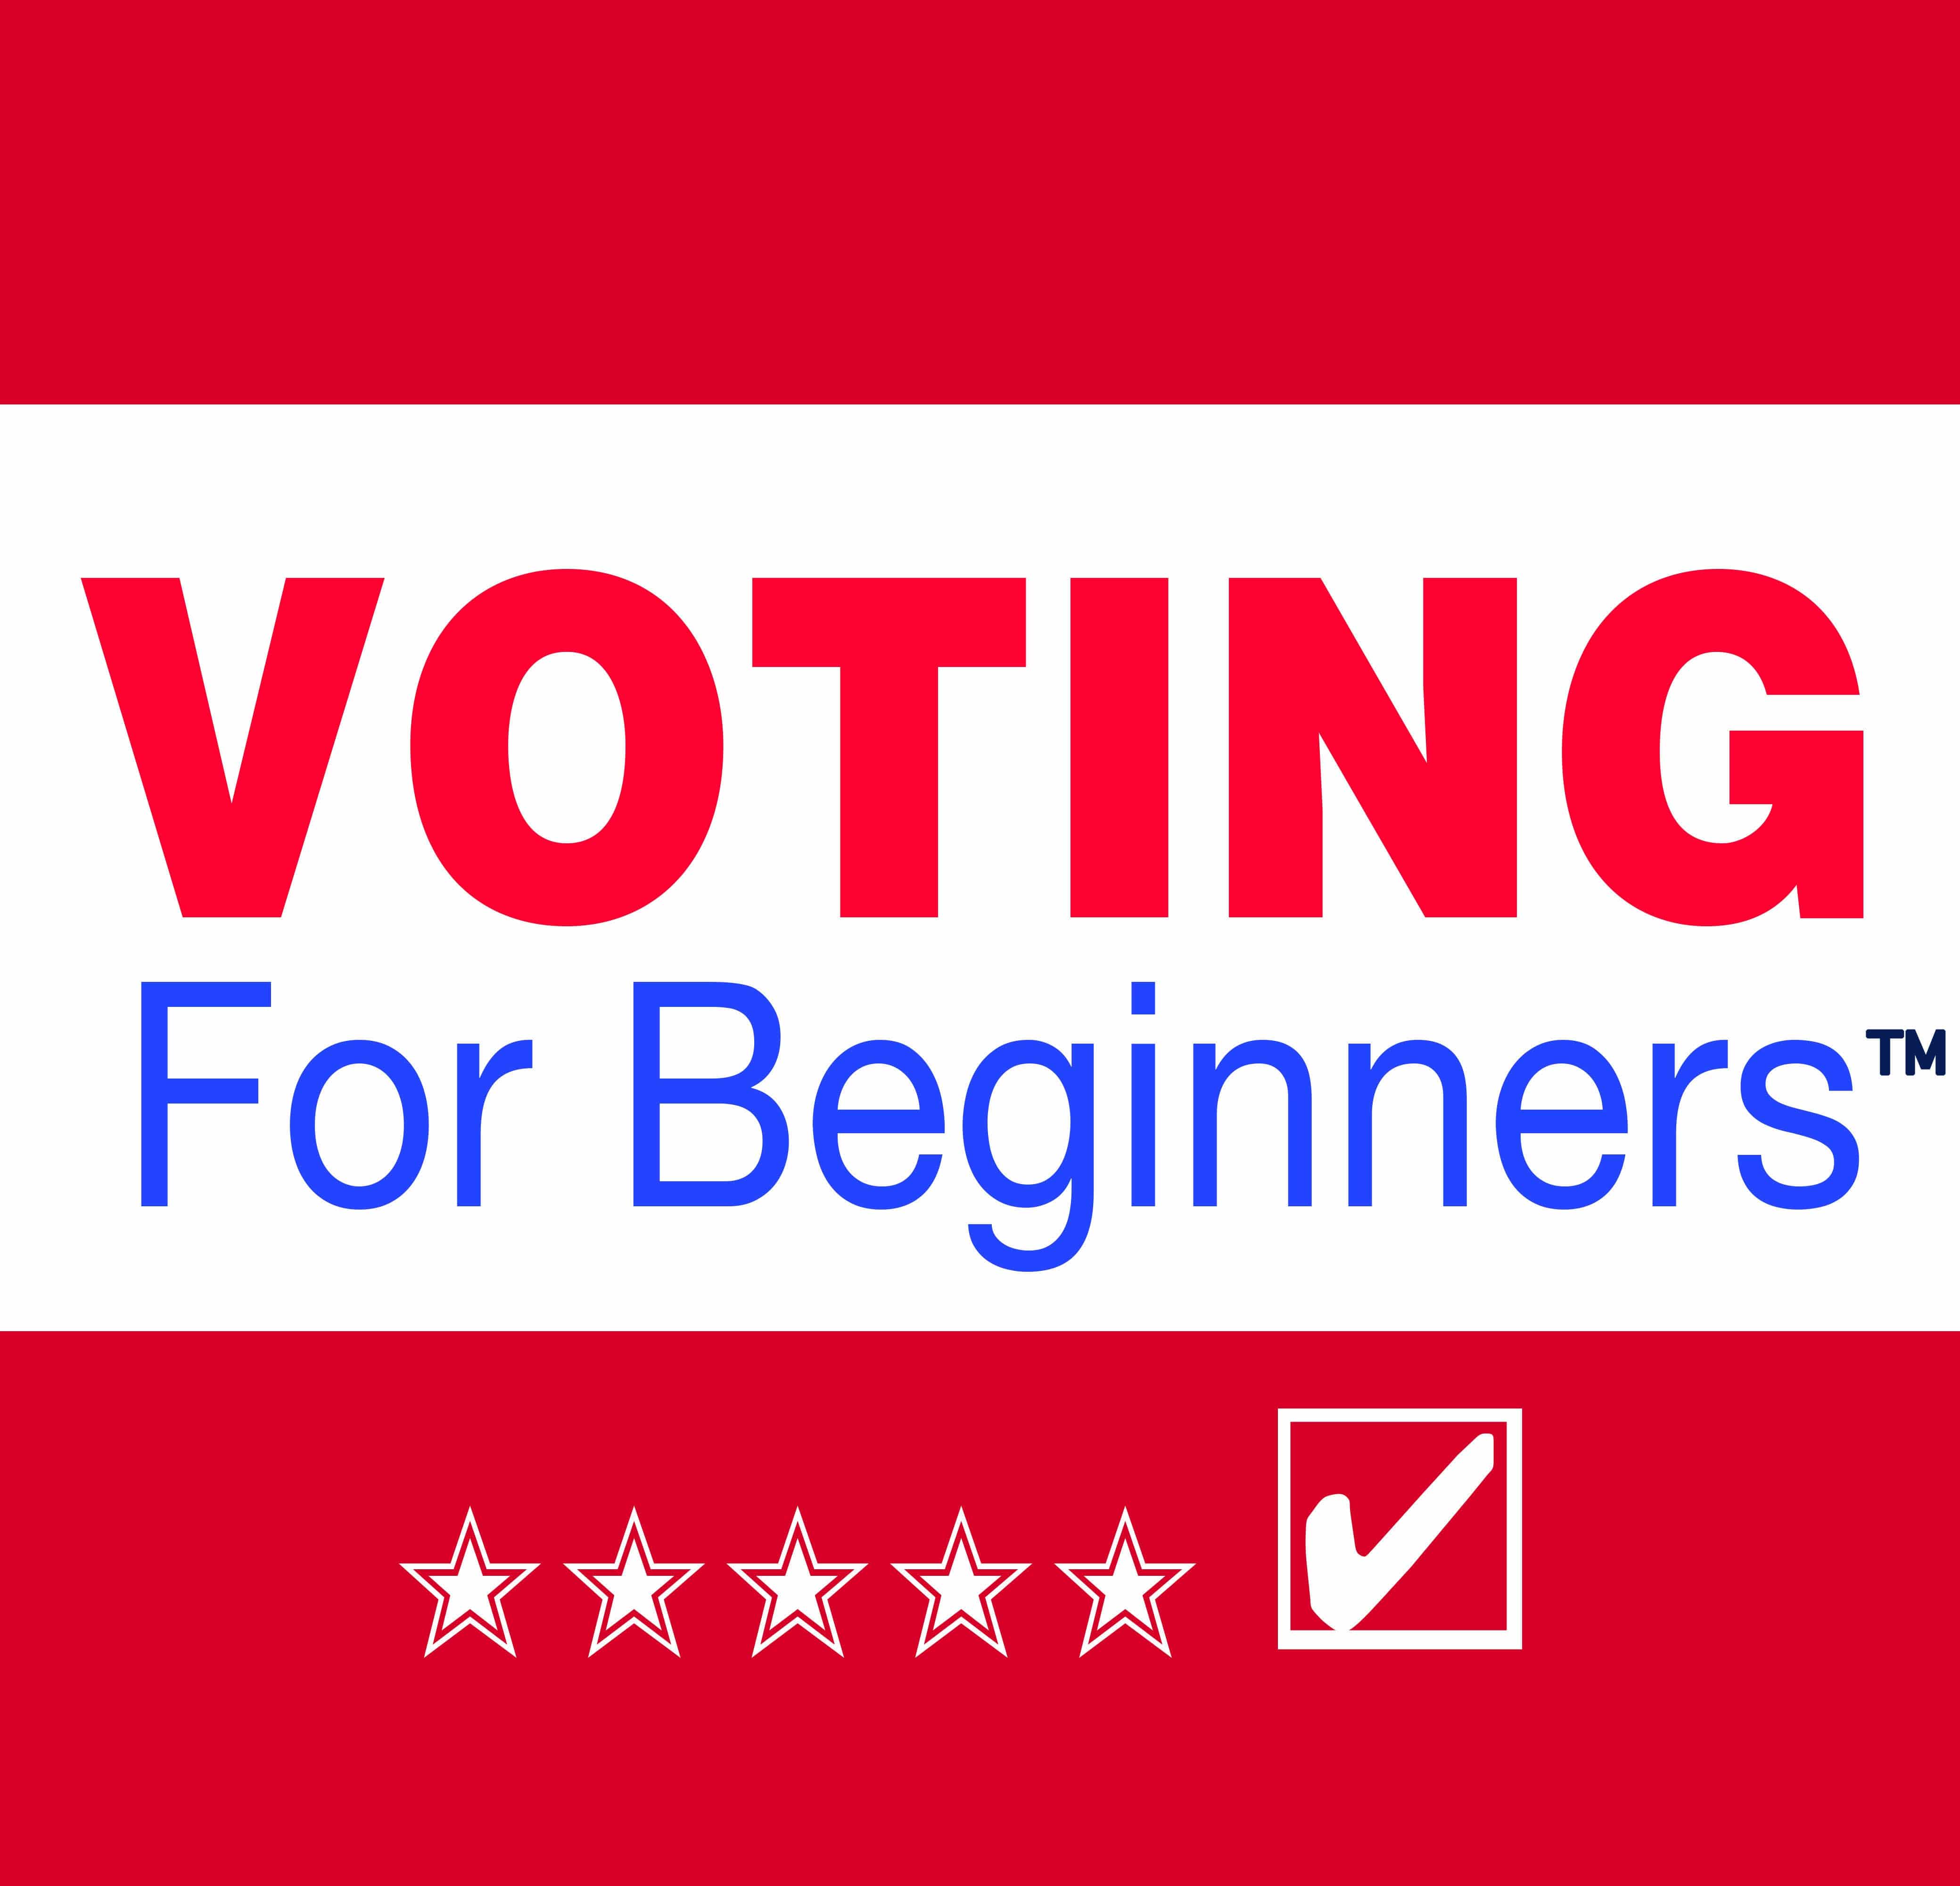 Voting For Beginners™